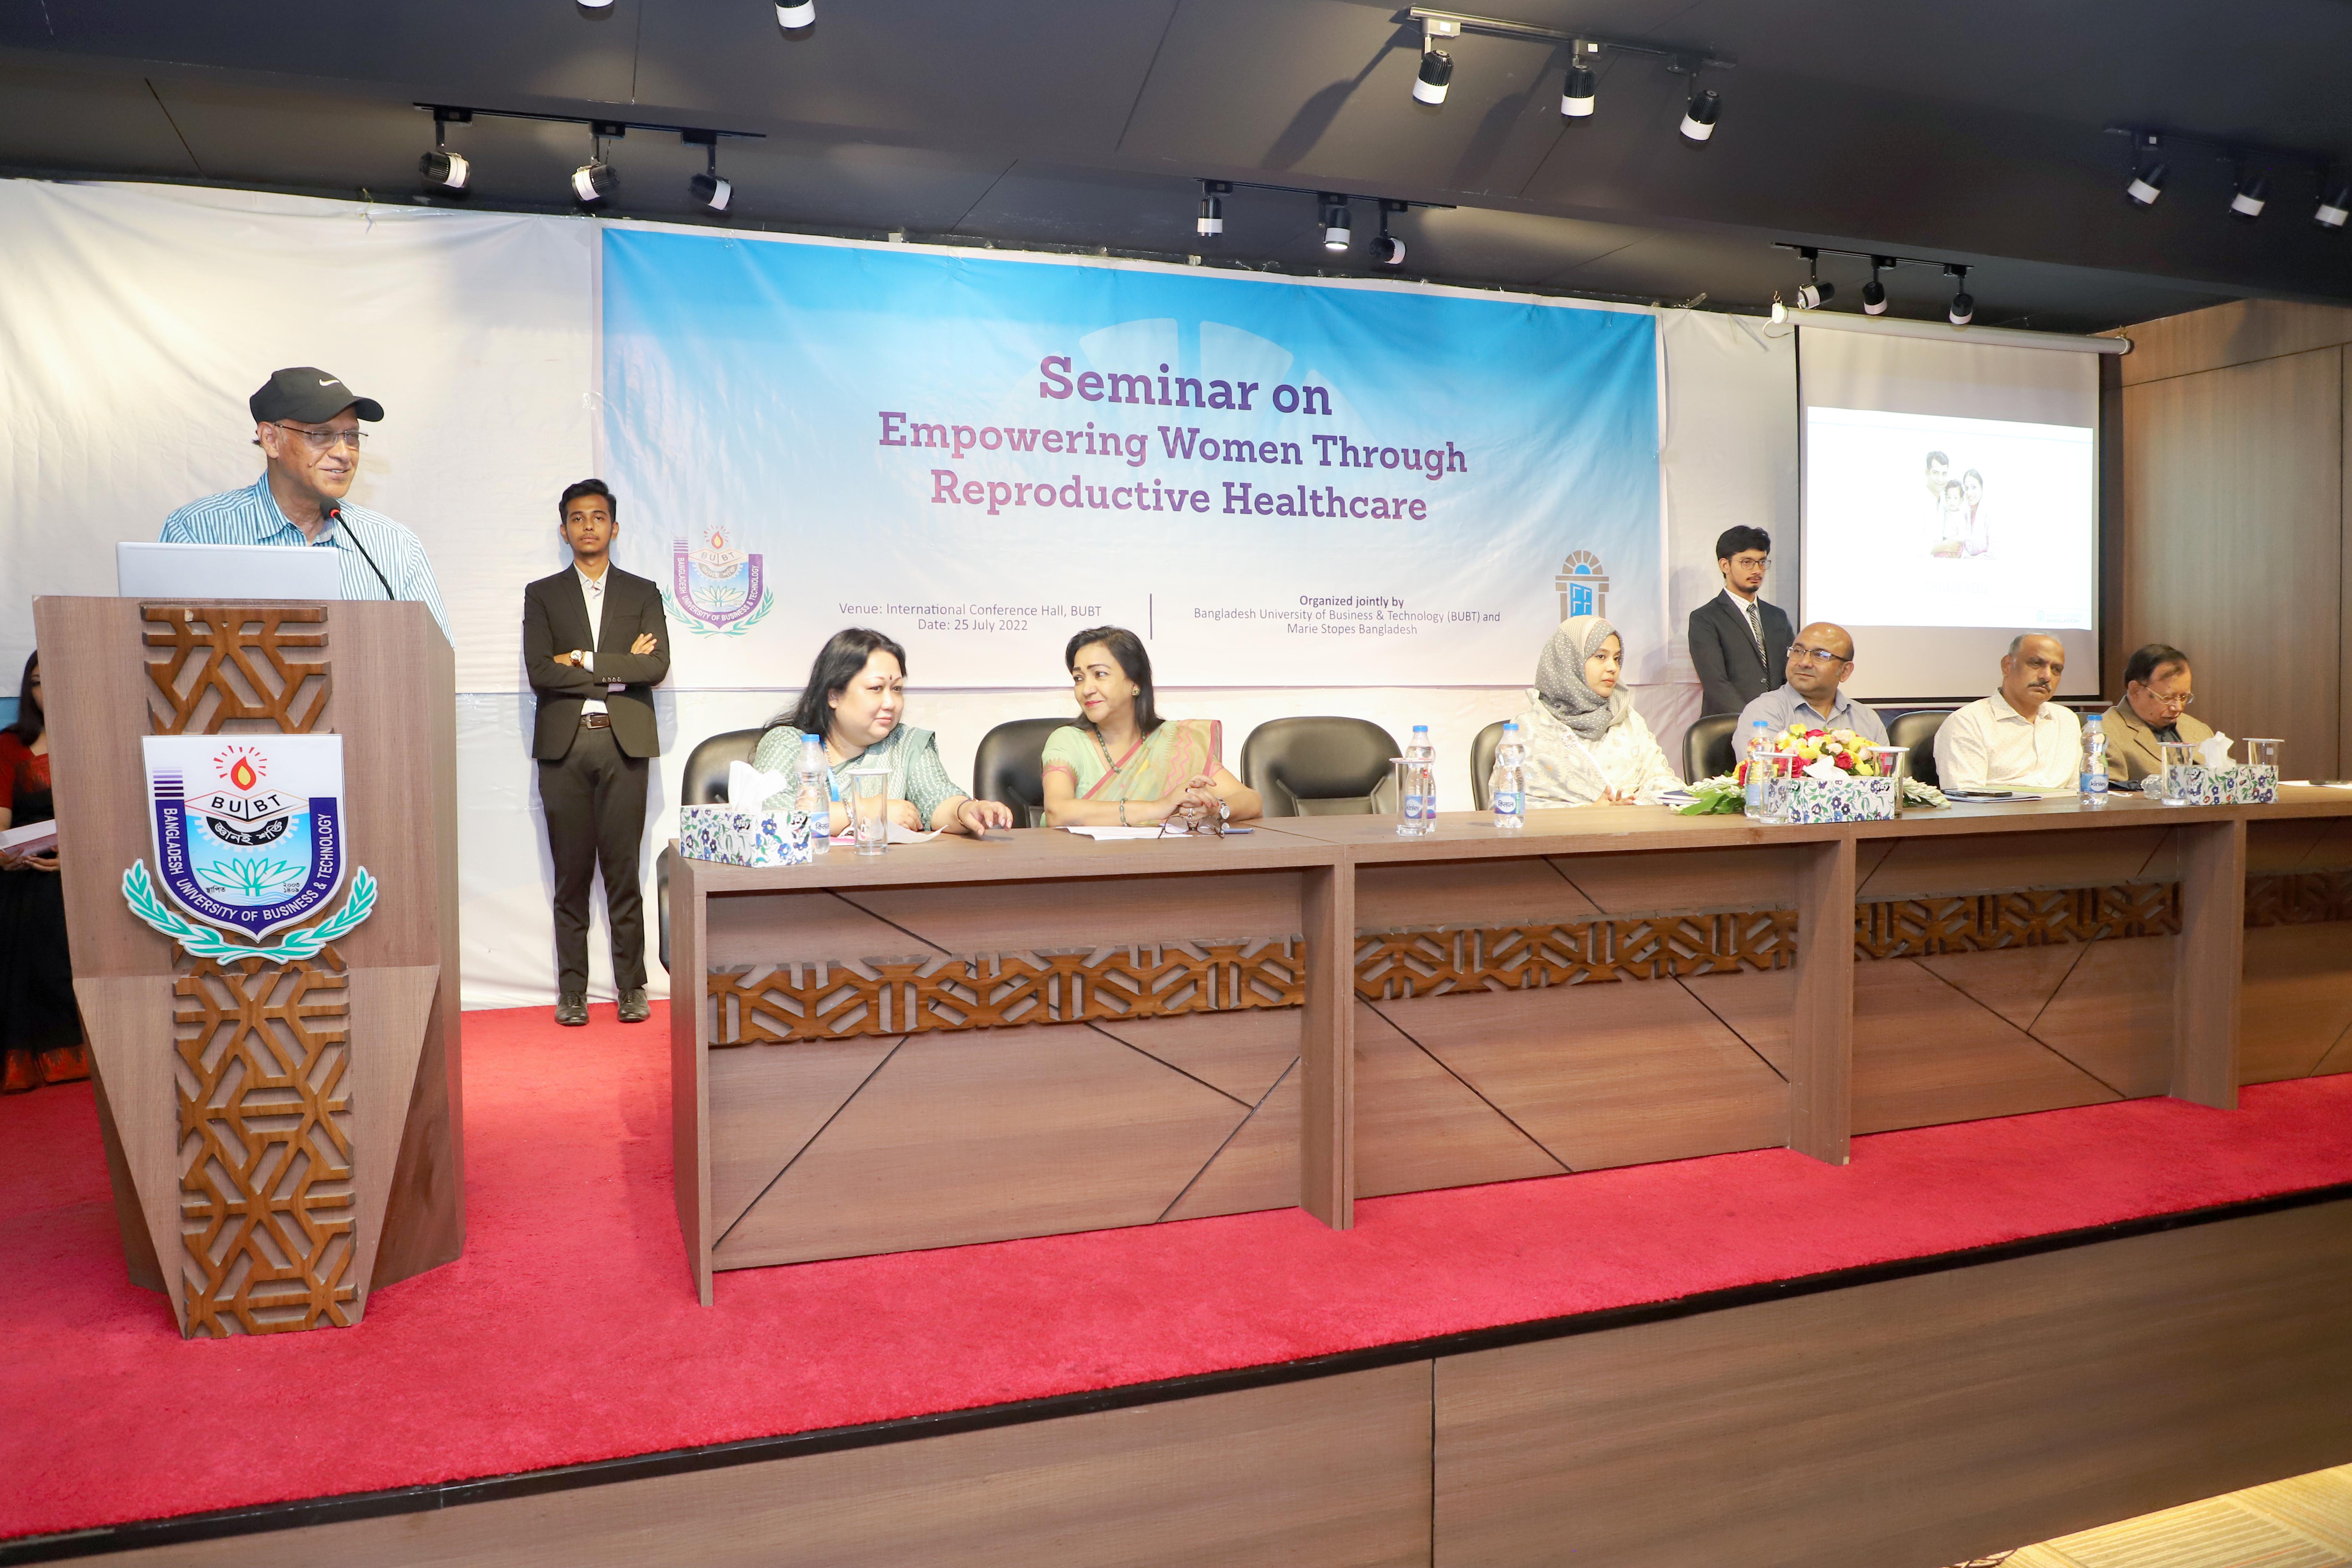 Seminar on ‘Empowering Women through Reproductive Healthcare’ held at BUBT